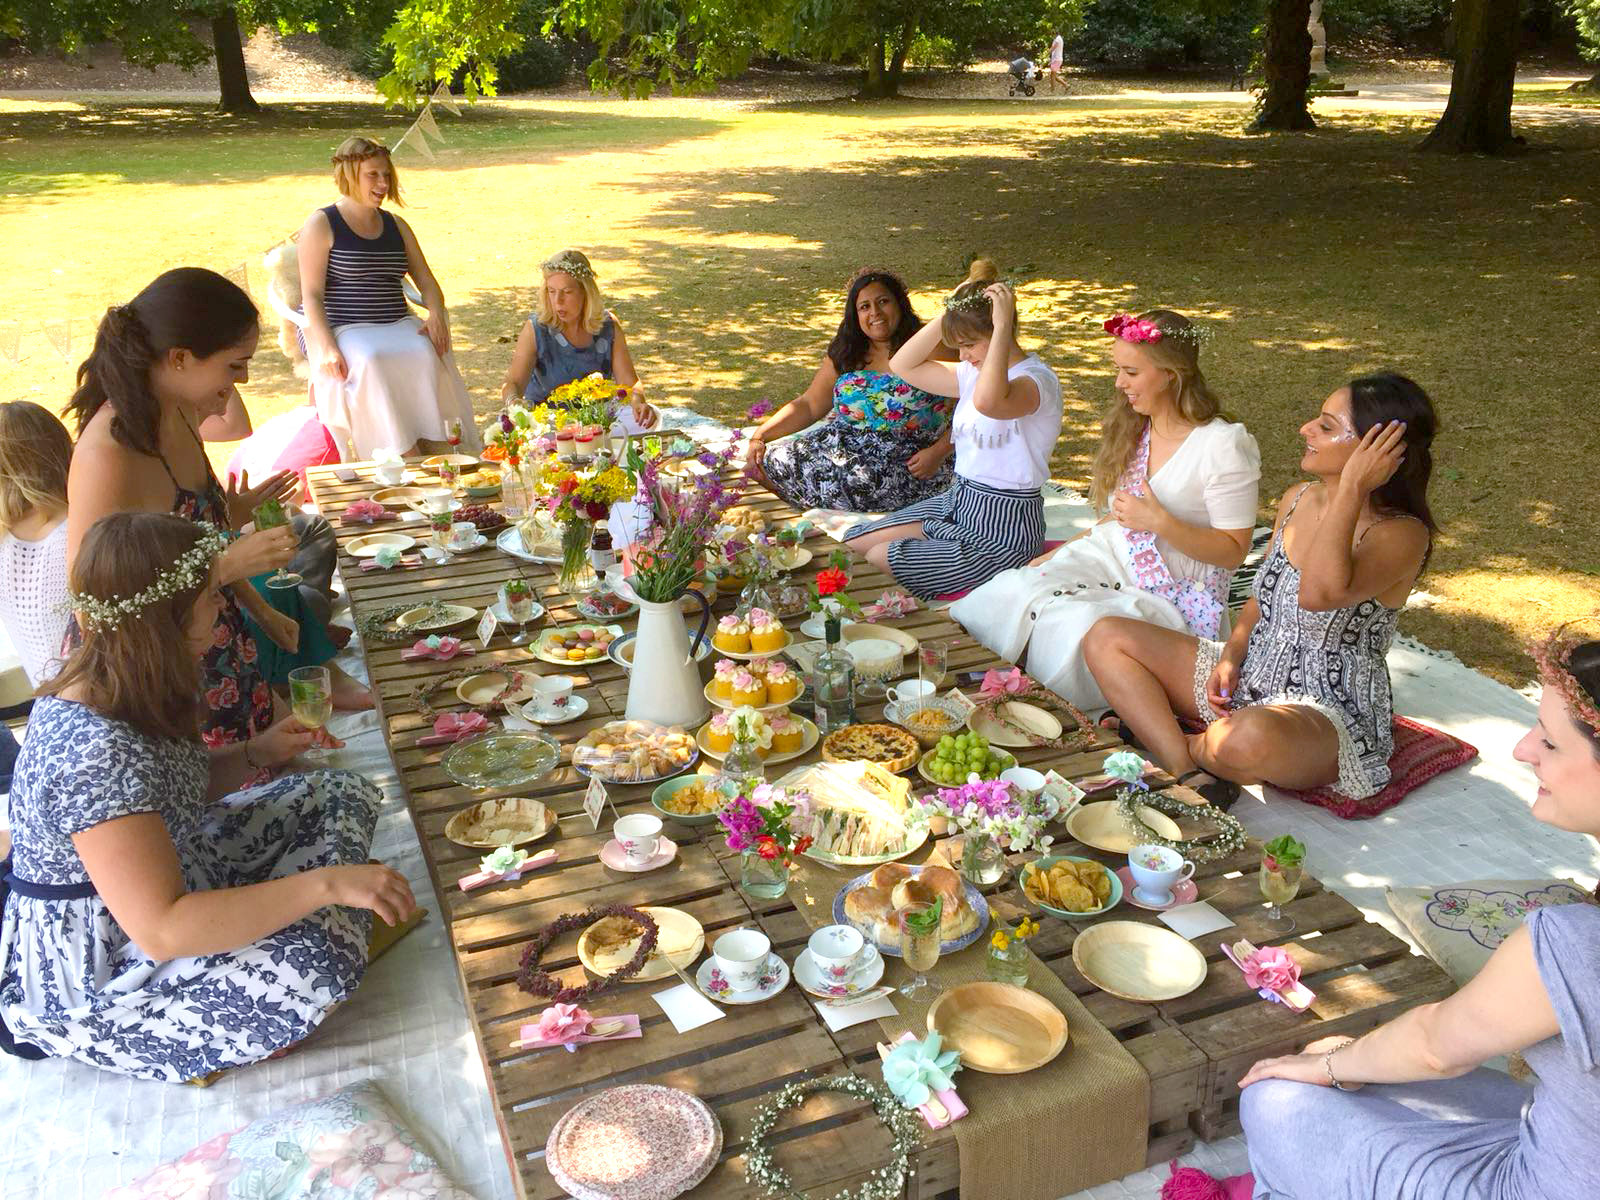 British Hen Do in St. Albans Park with wooden apple crates and a picnic